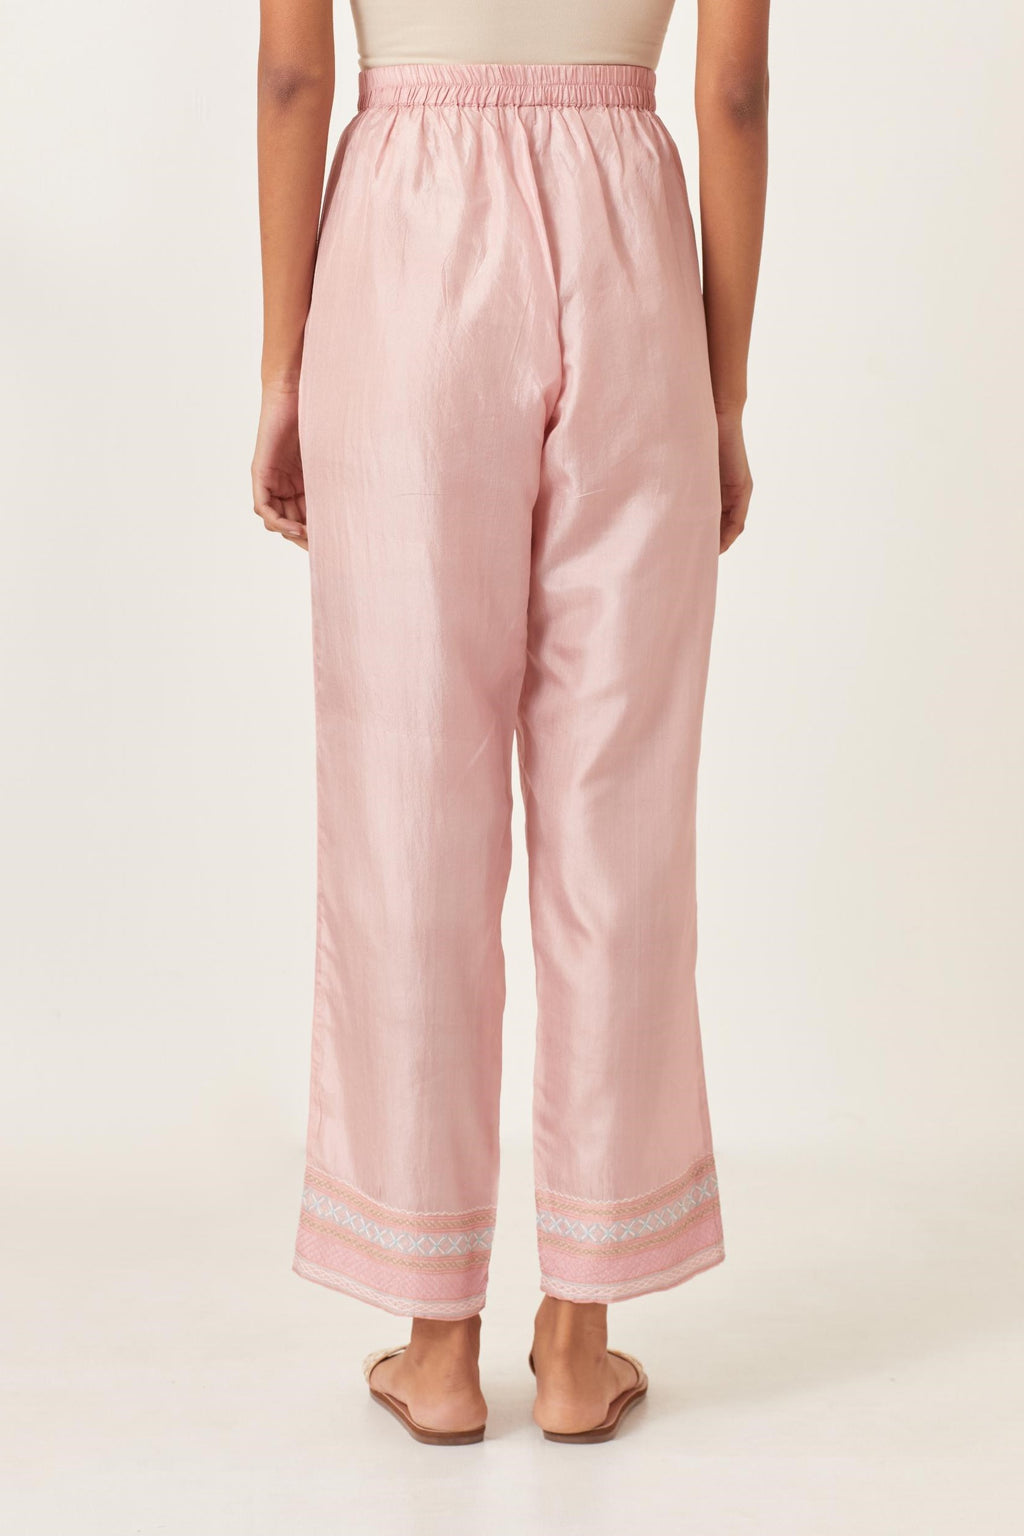 Pink silk straight pants detailed with quilted multi colored embroidery at bottom.